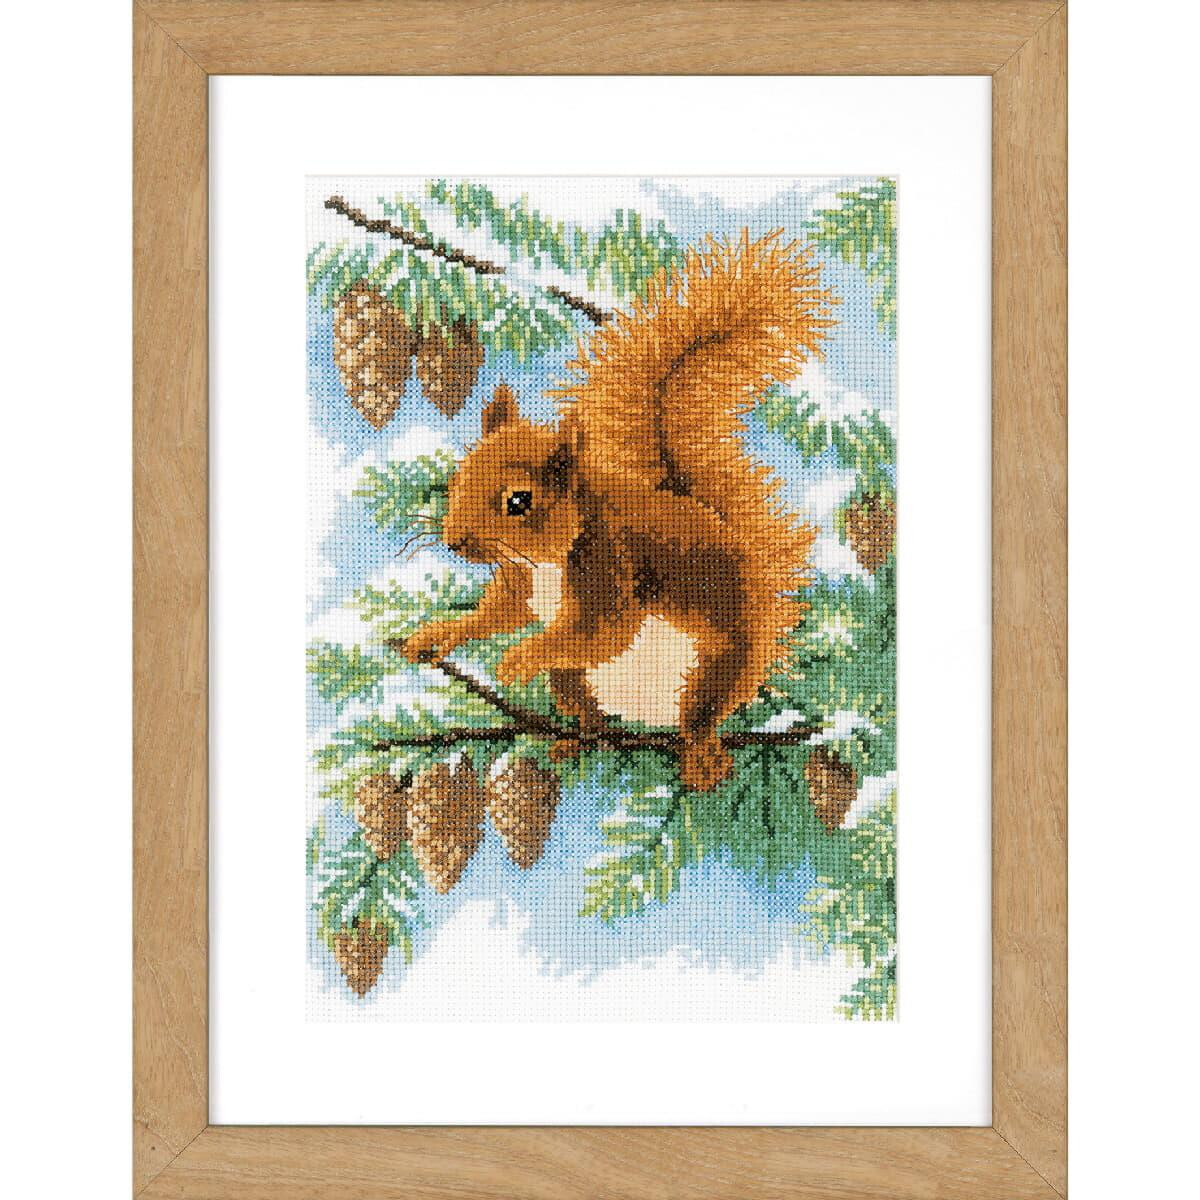 Vervaco counted cross stitch kit "Squirrel",...